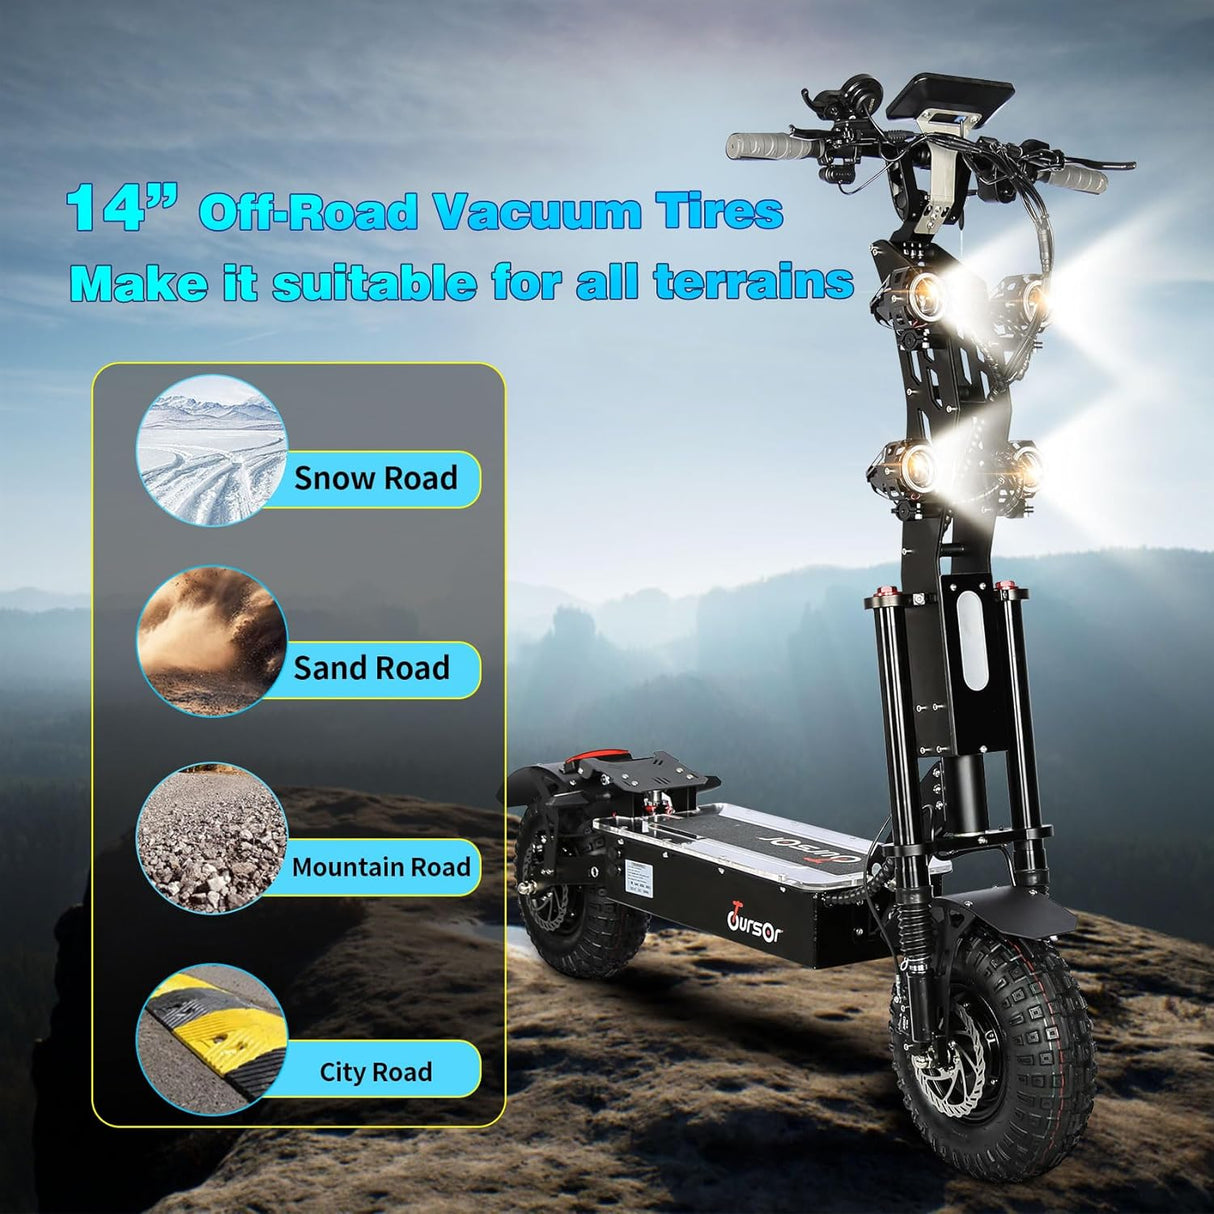 TOURSOR X14 72V 14" Folding Electric Scooter with Seat 5000W*2 Dual Motors 72V 40Ah Battery